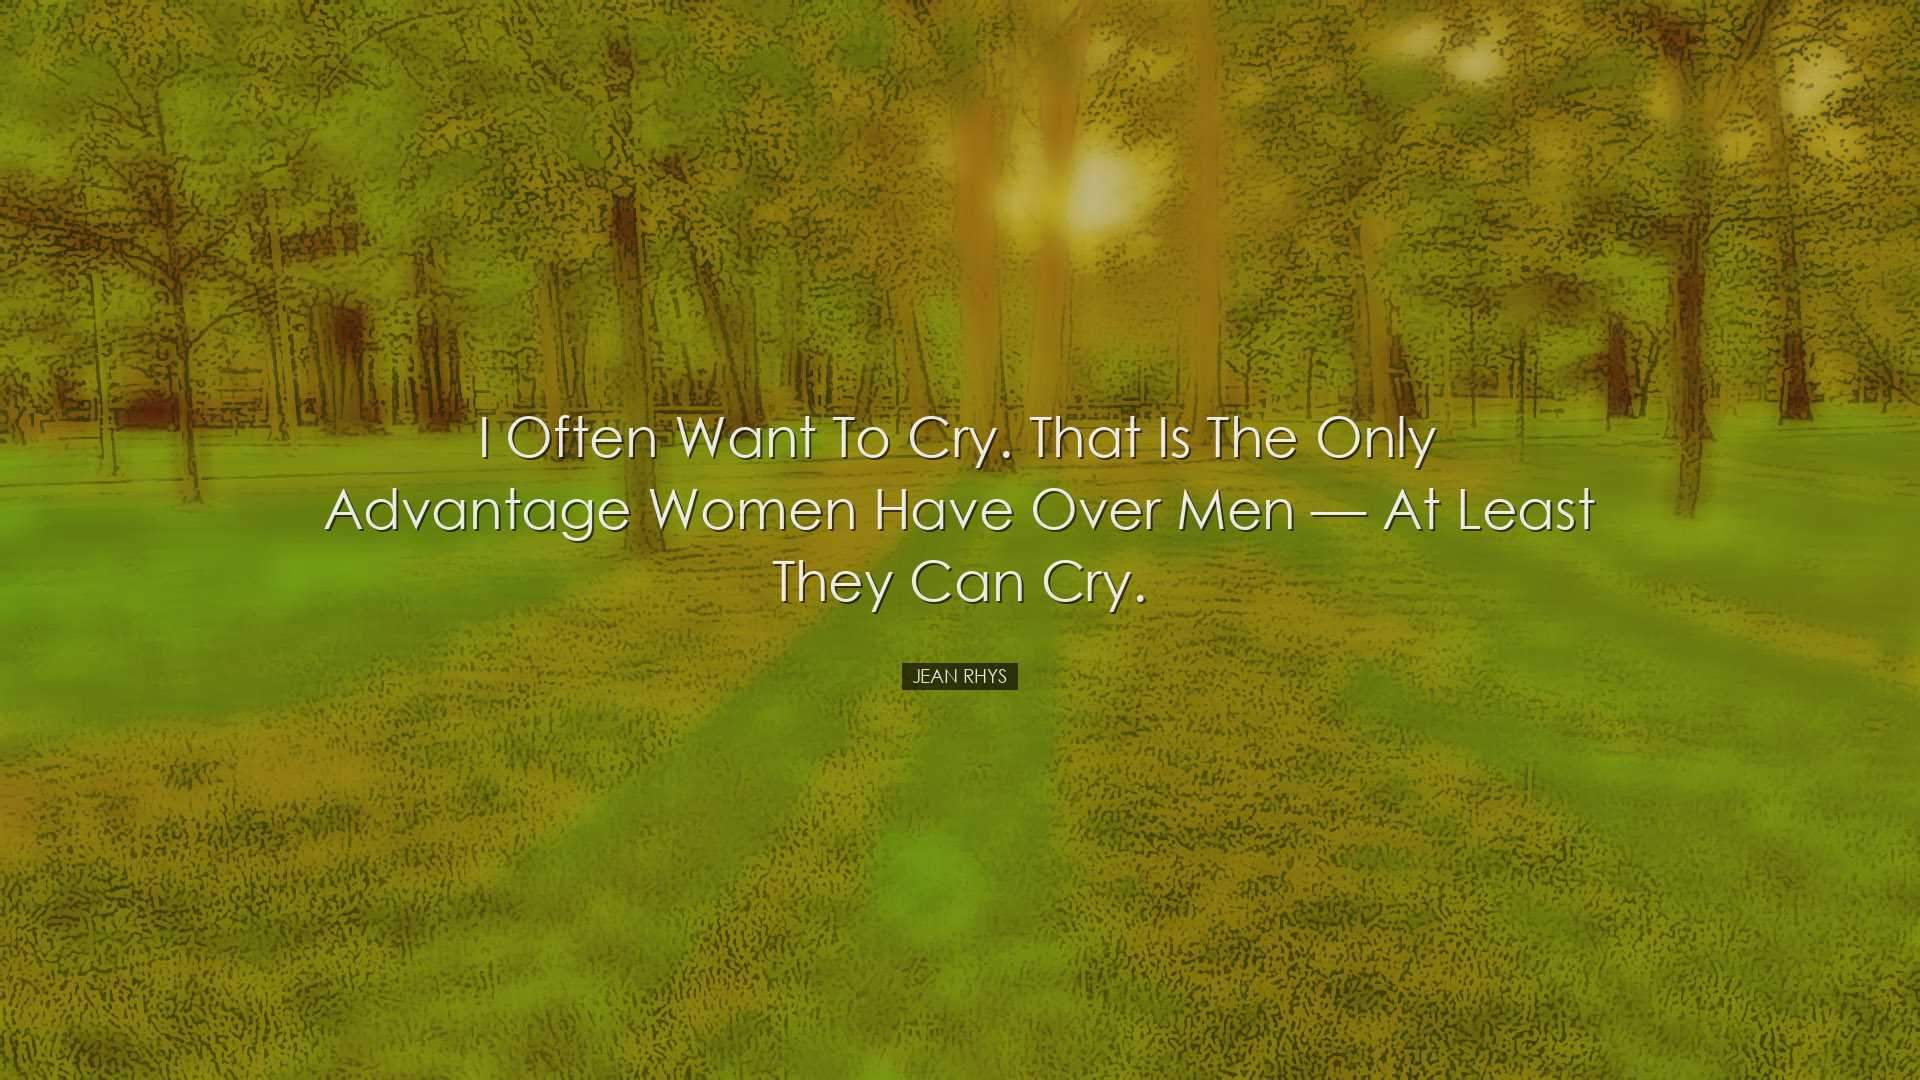 I often want to cry. That is the only advantage women have over me